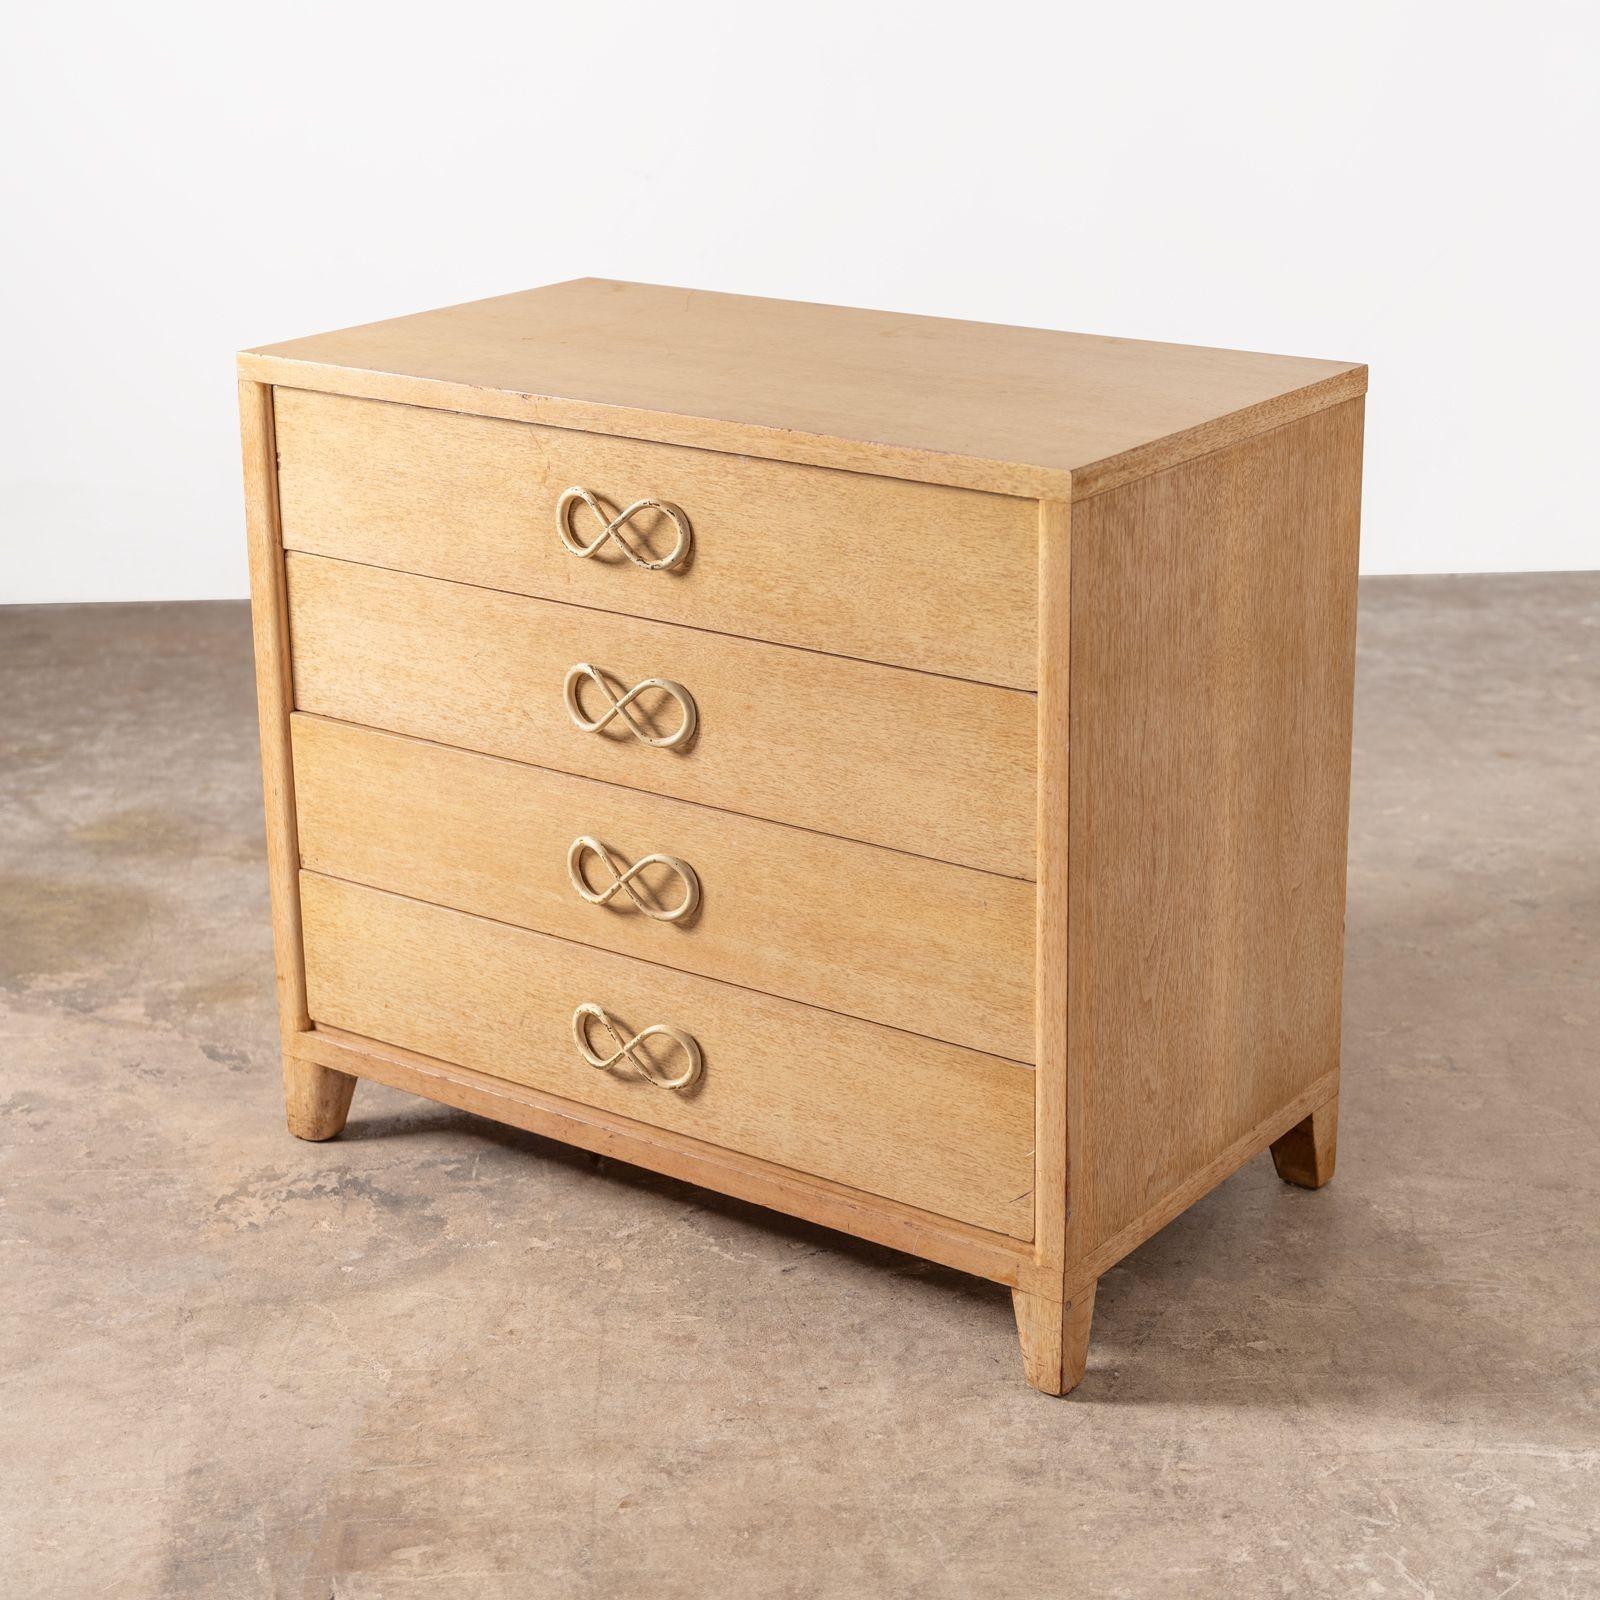 Marshall Field & Company Chest of Drawers in Cerused Oak After Samuel Marx 1940s For Sale 3